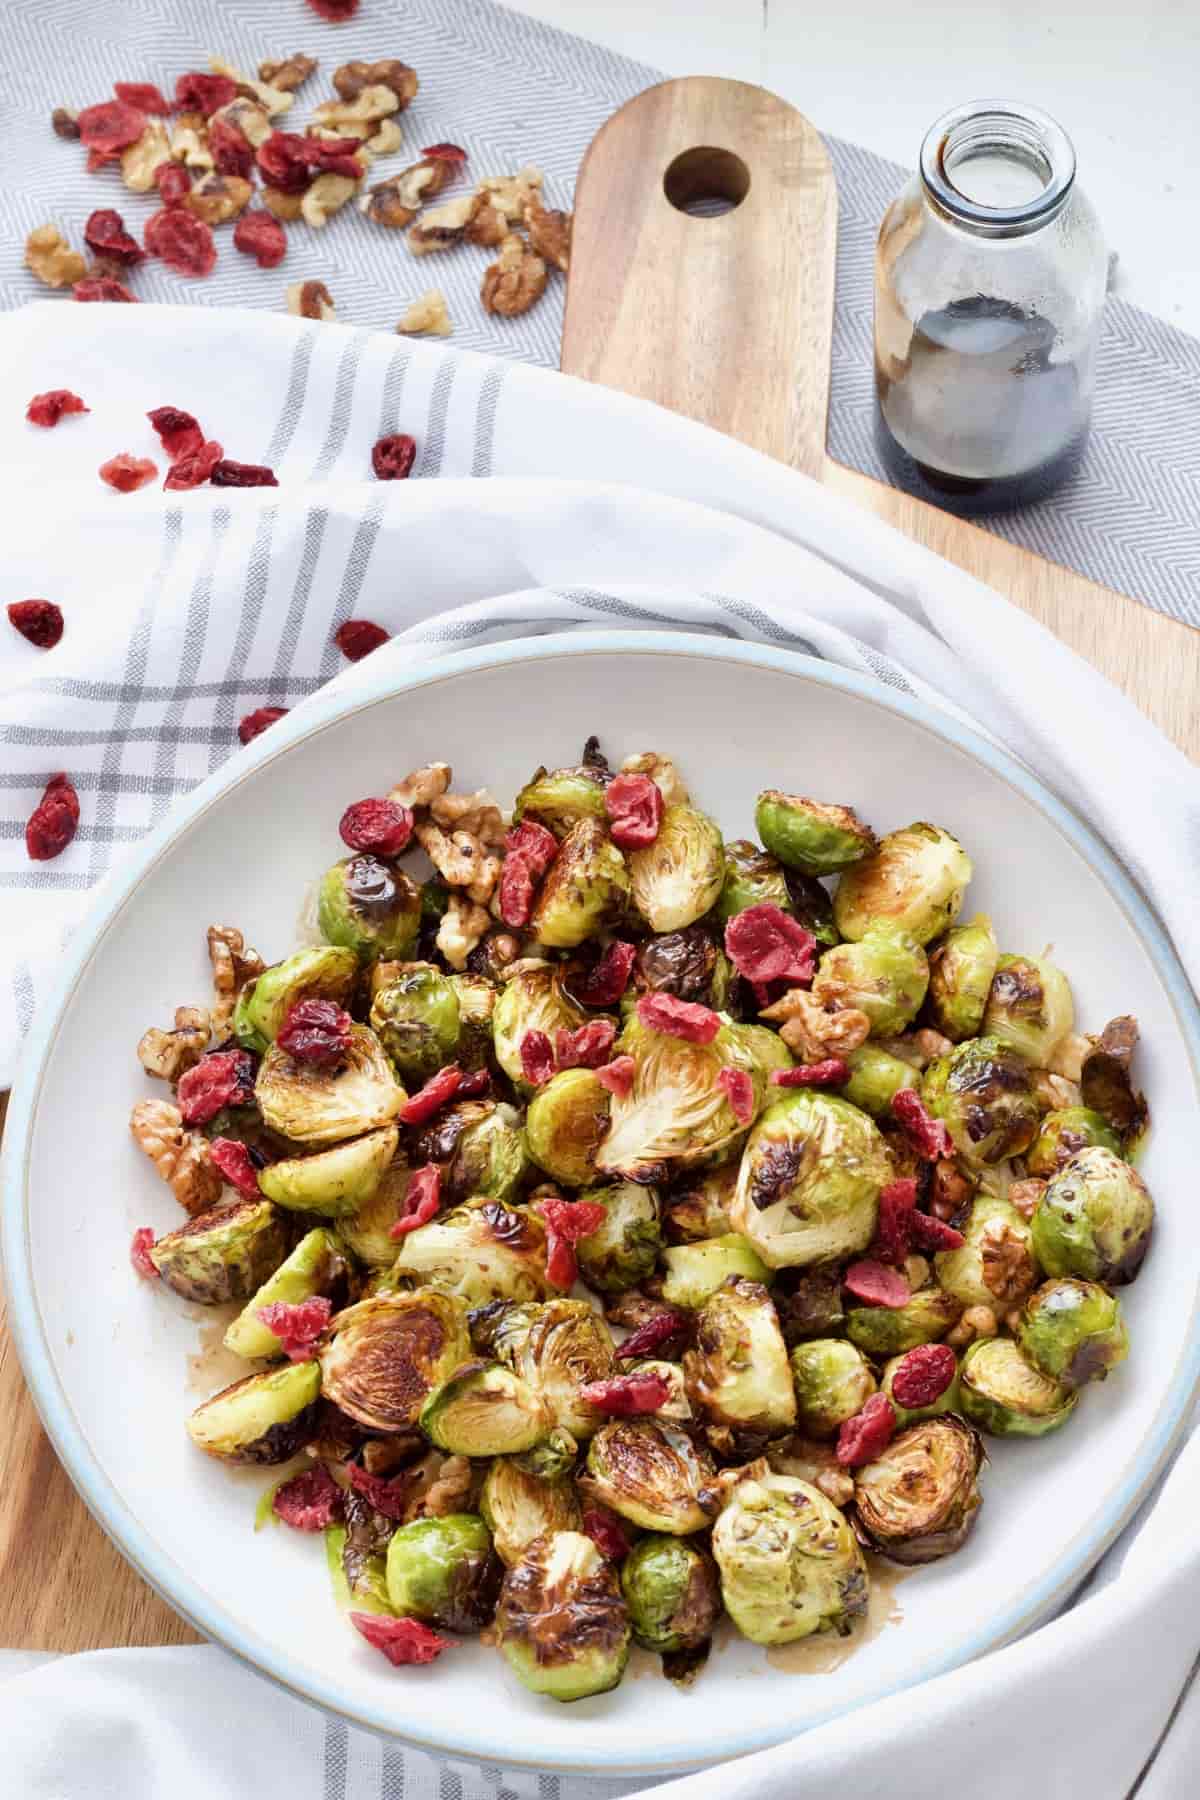 Roasted brussels sprouts with cranberries in a bowl on a board.